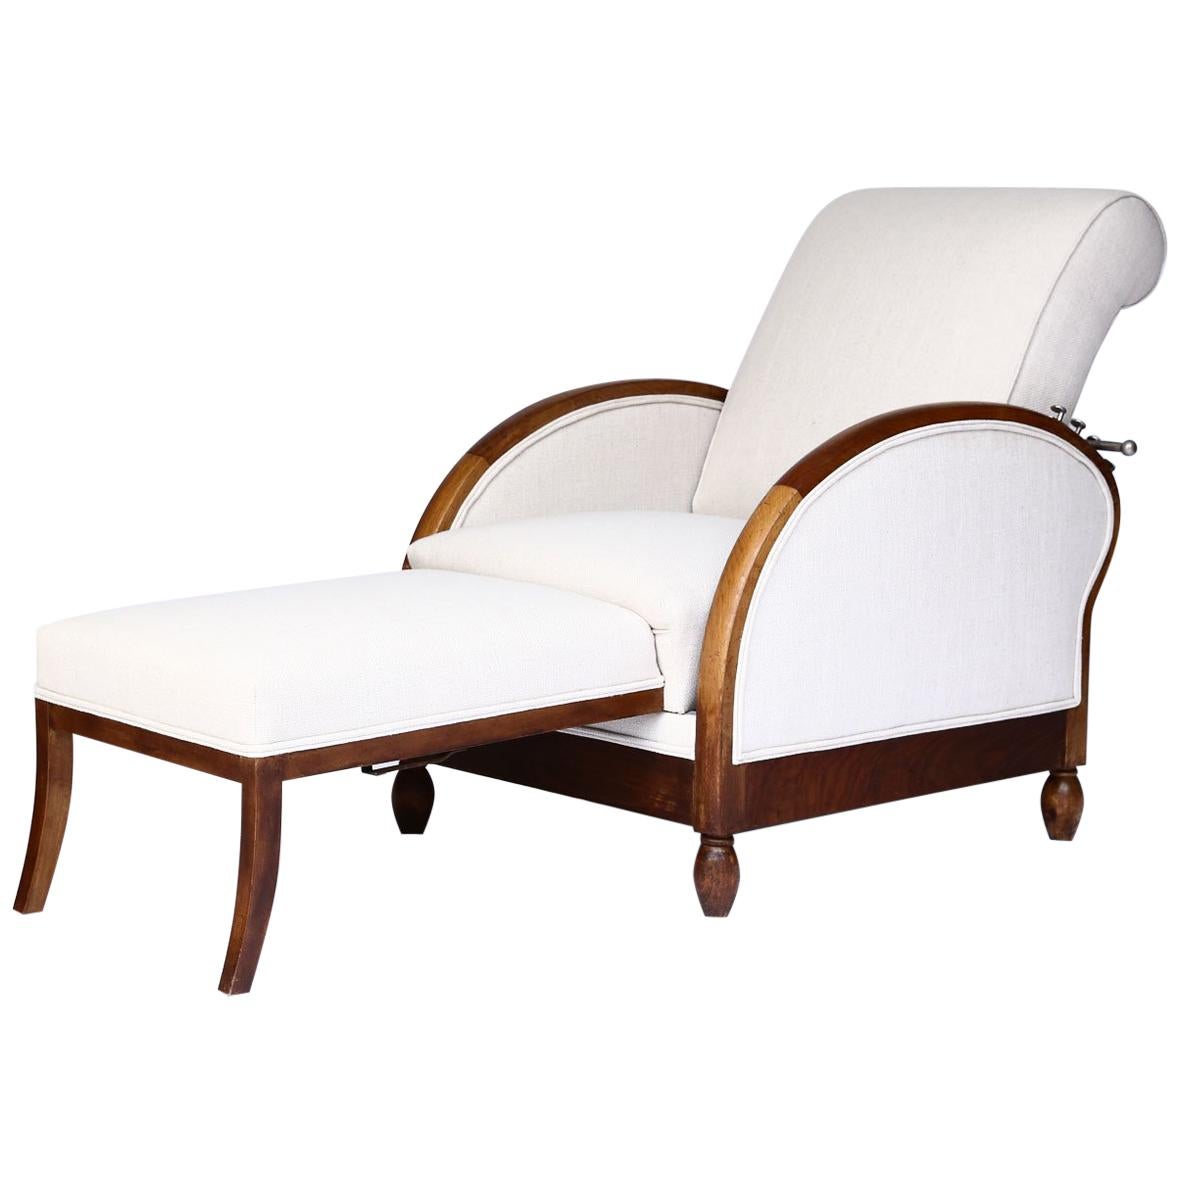 French Deco Reclining Club Chair, circa 1915, Newly Upholstered